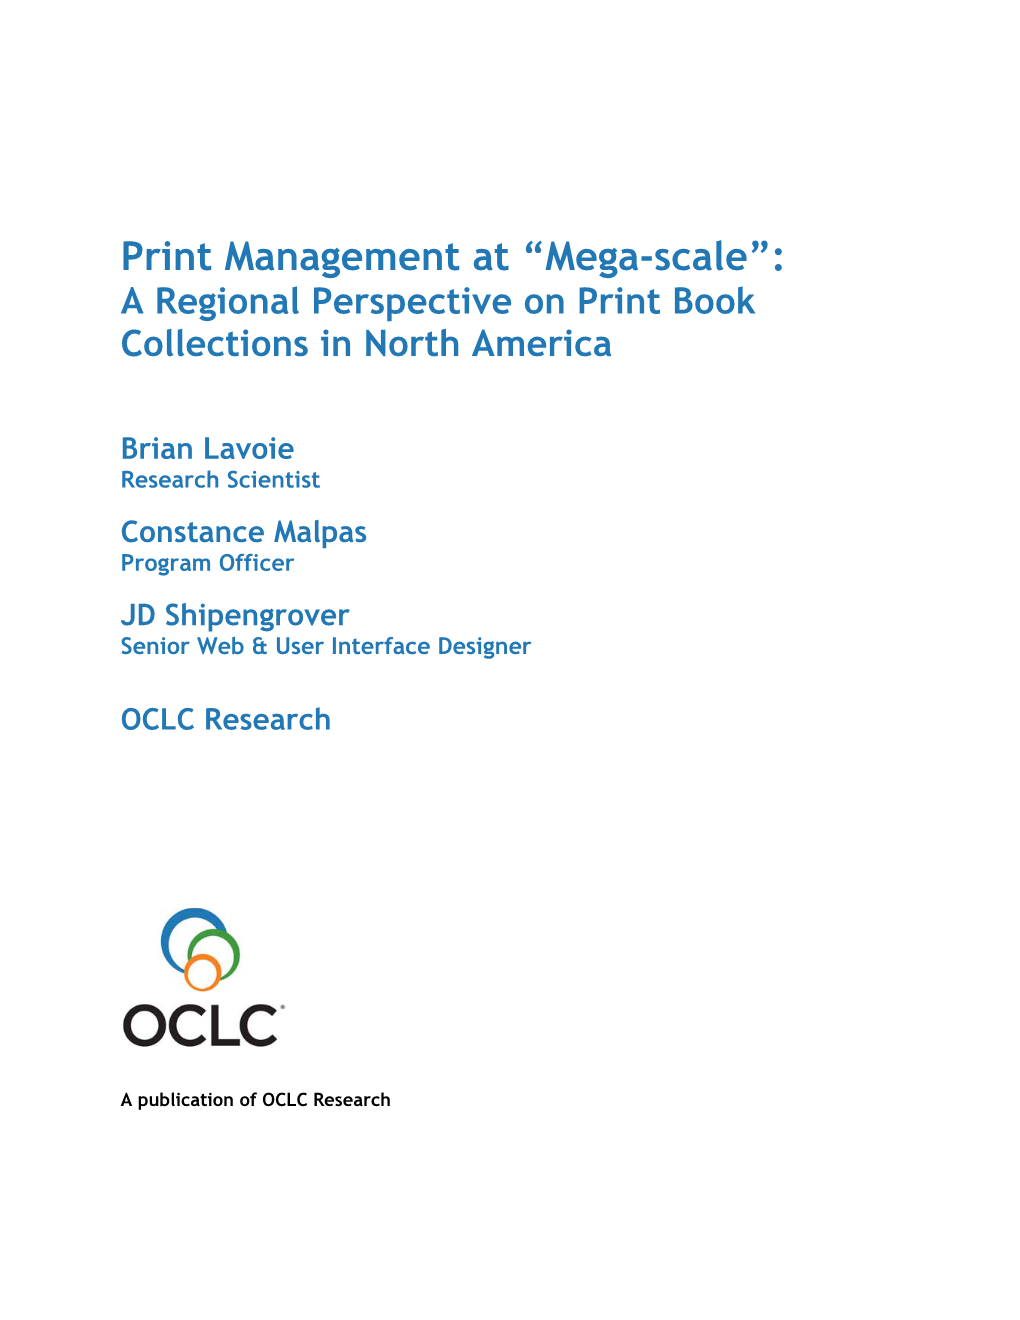 Print Management at “Mega-Scale”: a Regional Perspective on Print Book Collections in North America